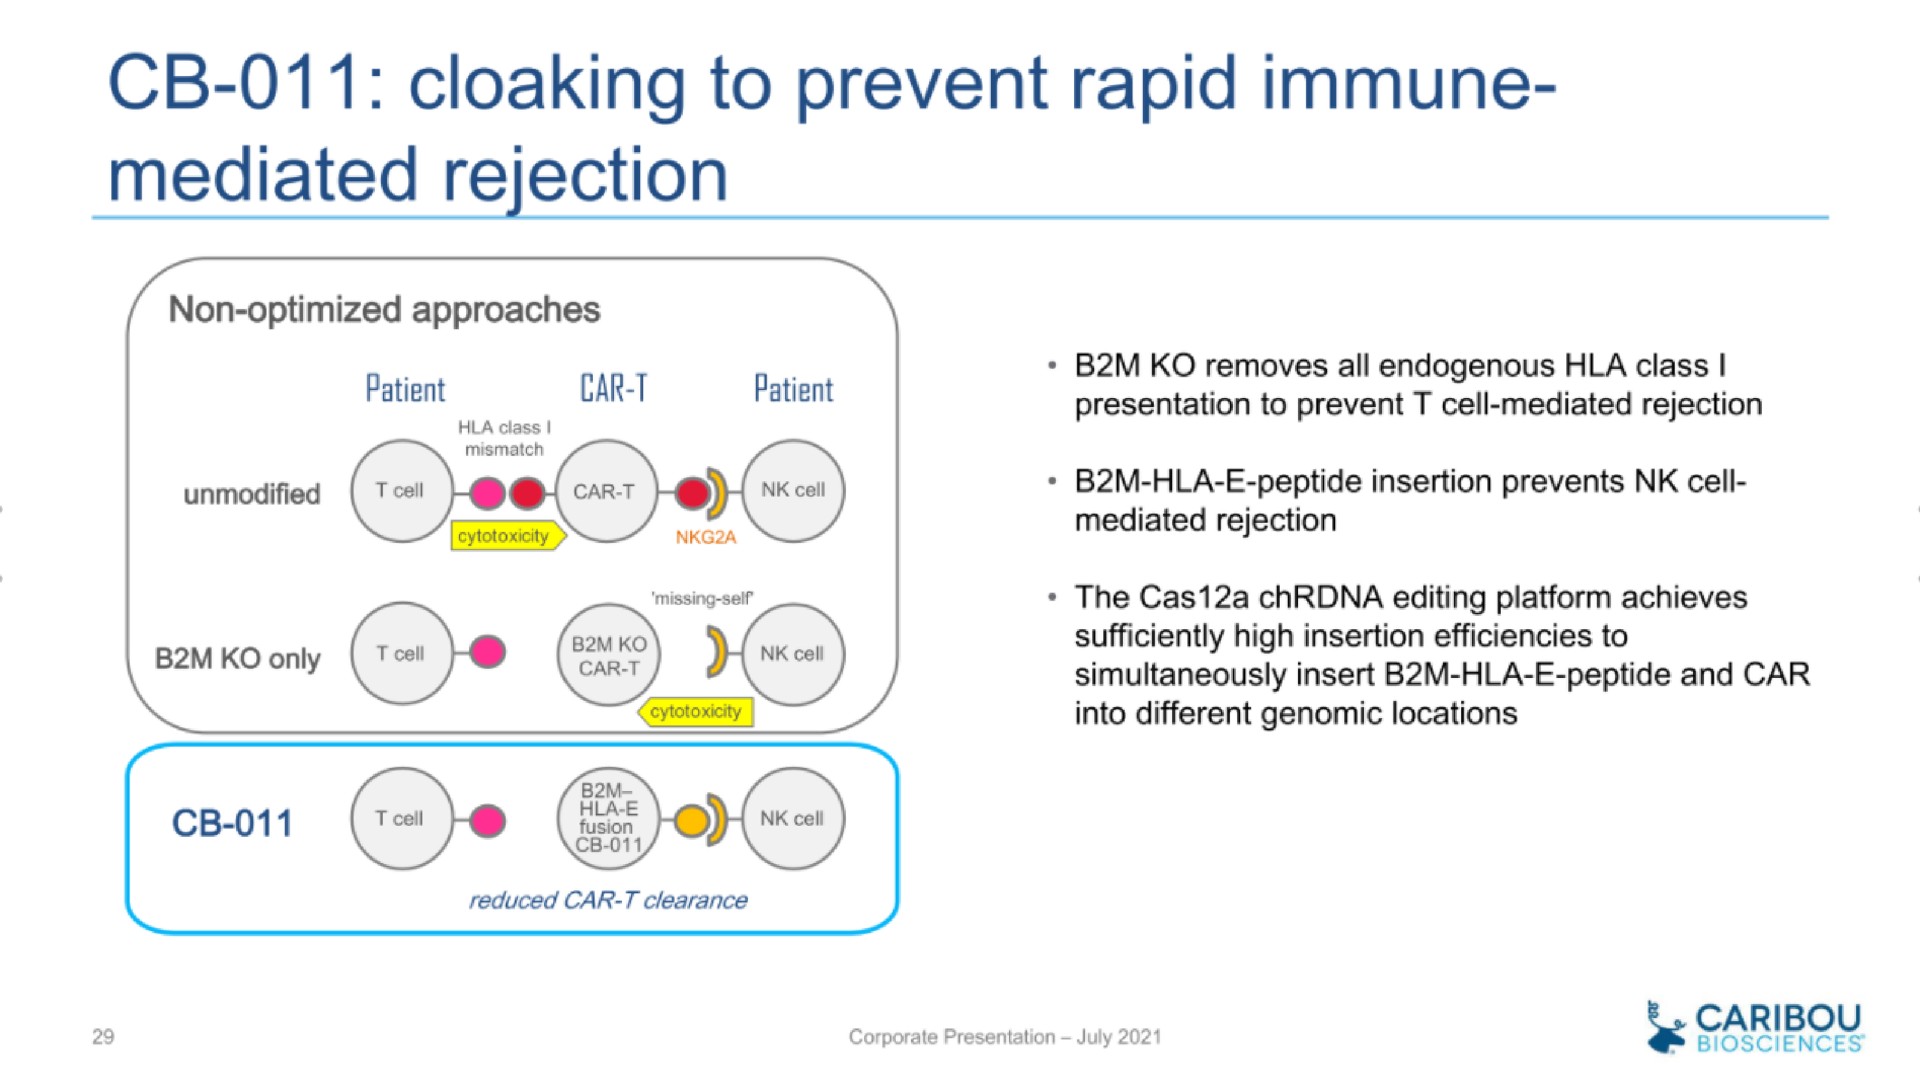 cloaking to prevent rapid immune mediated rejection | Caribou Biosciences